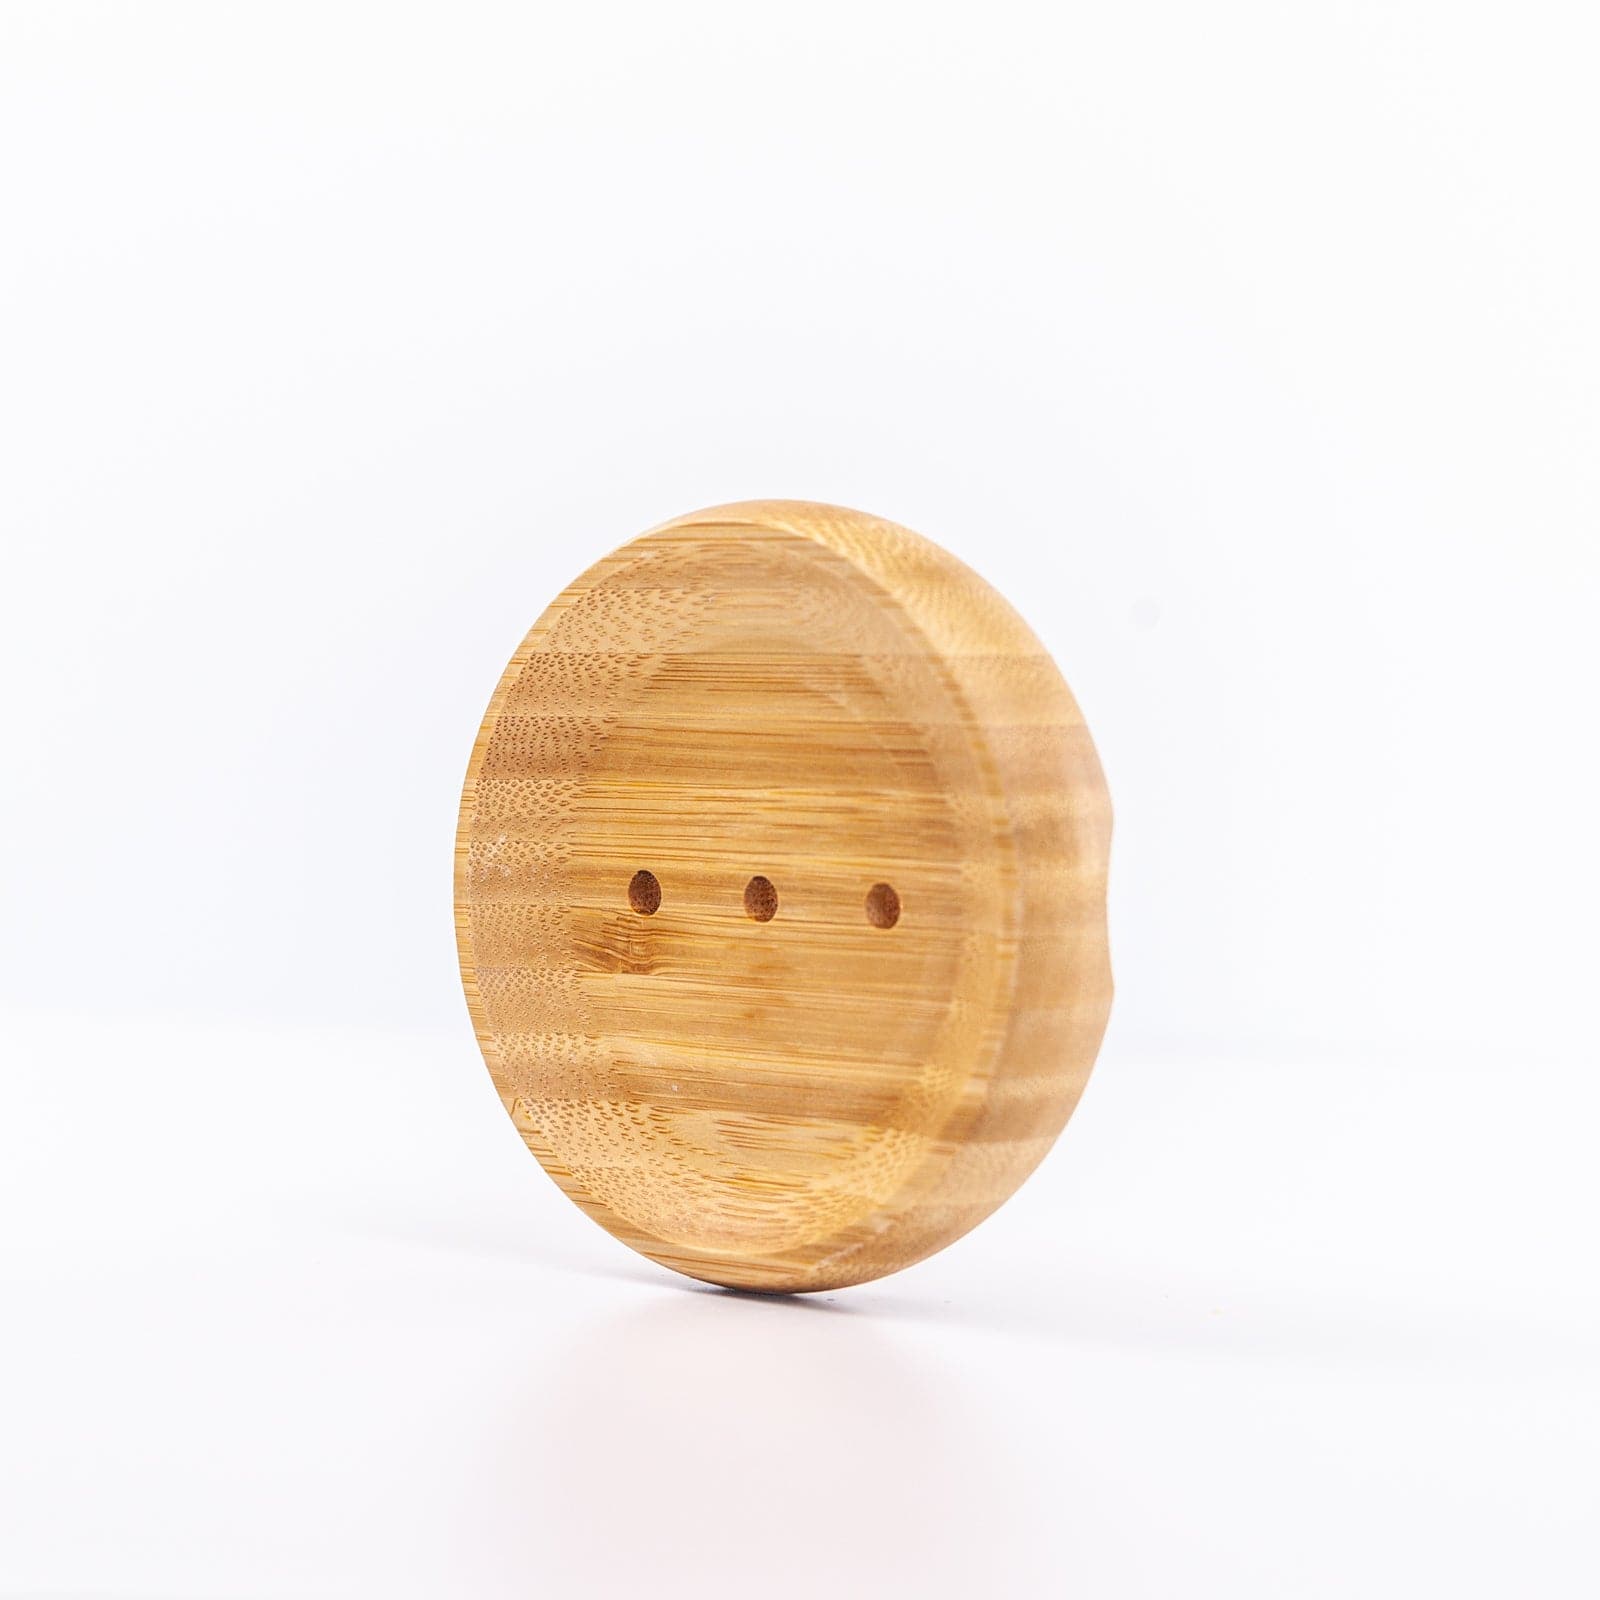 Right angle of round wooden soap dish rightside up